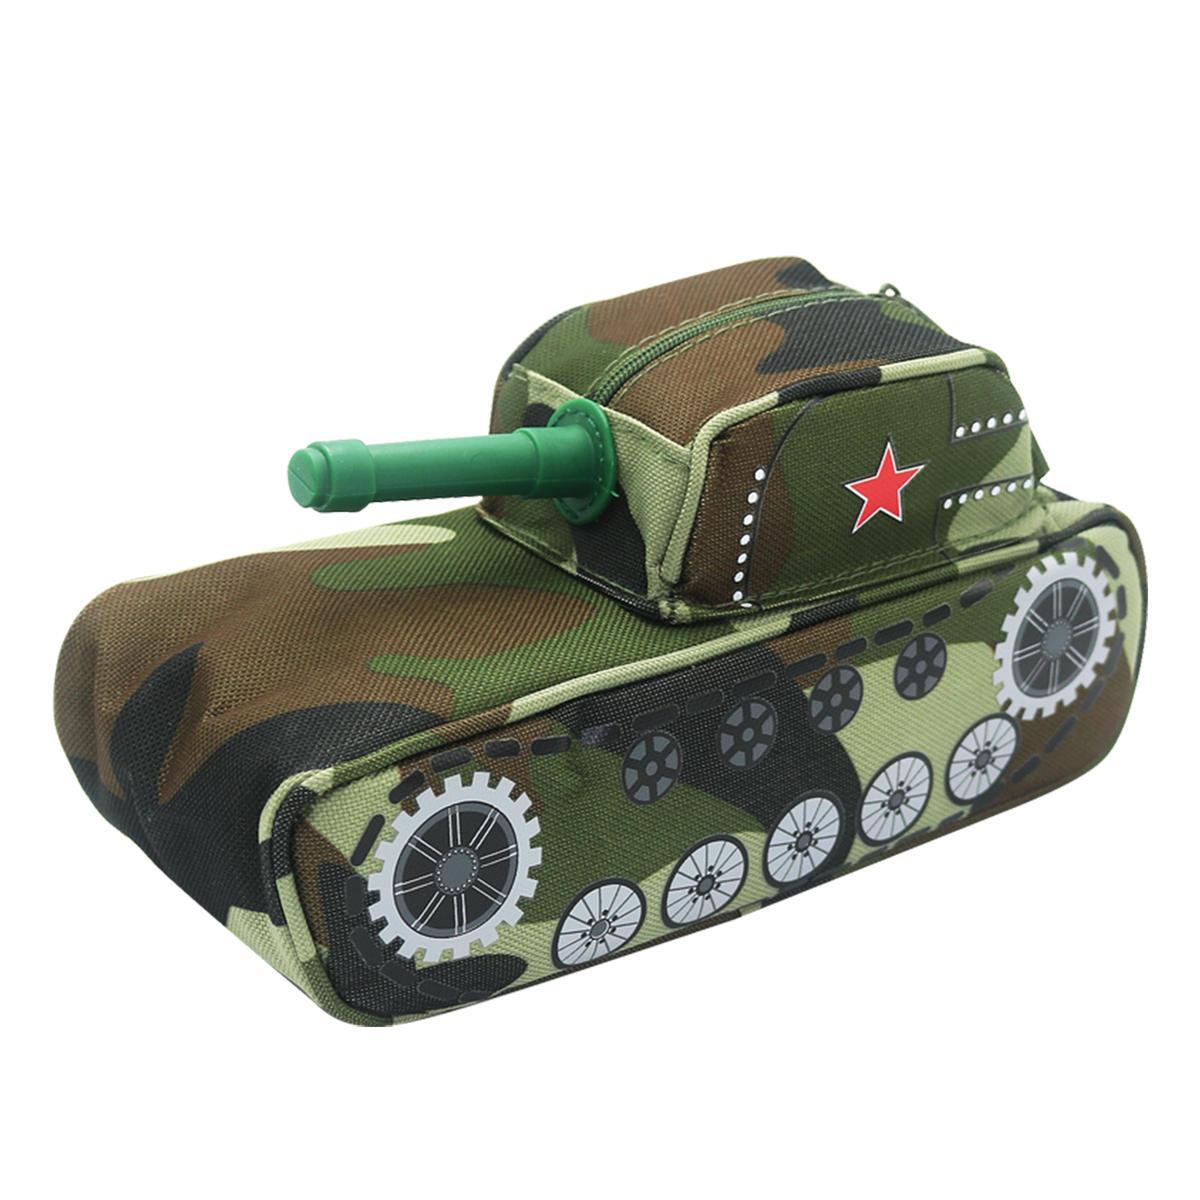 Large Capacity Creative Camouflage Tank Shape Stationery Organizer Zipper Pen Pencil Bag Anti-theft Pencil Case Gifts School Students Supplies